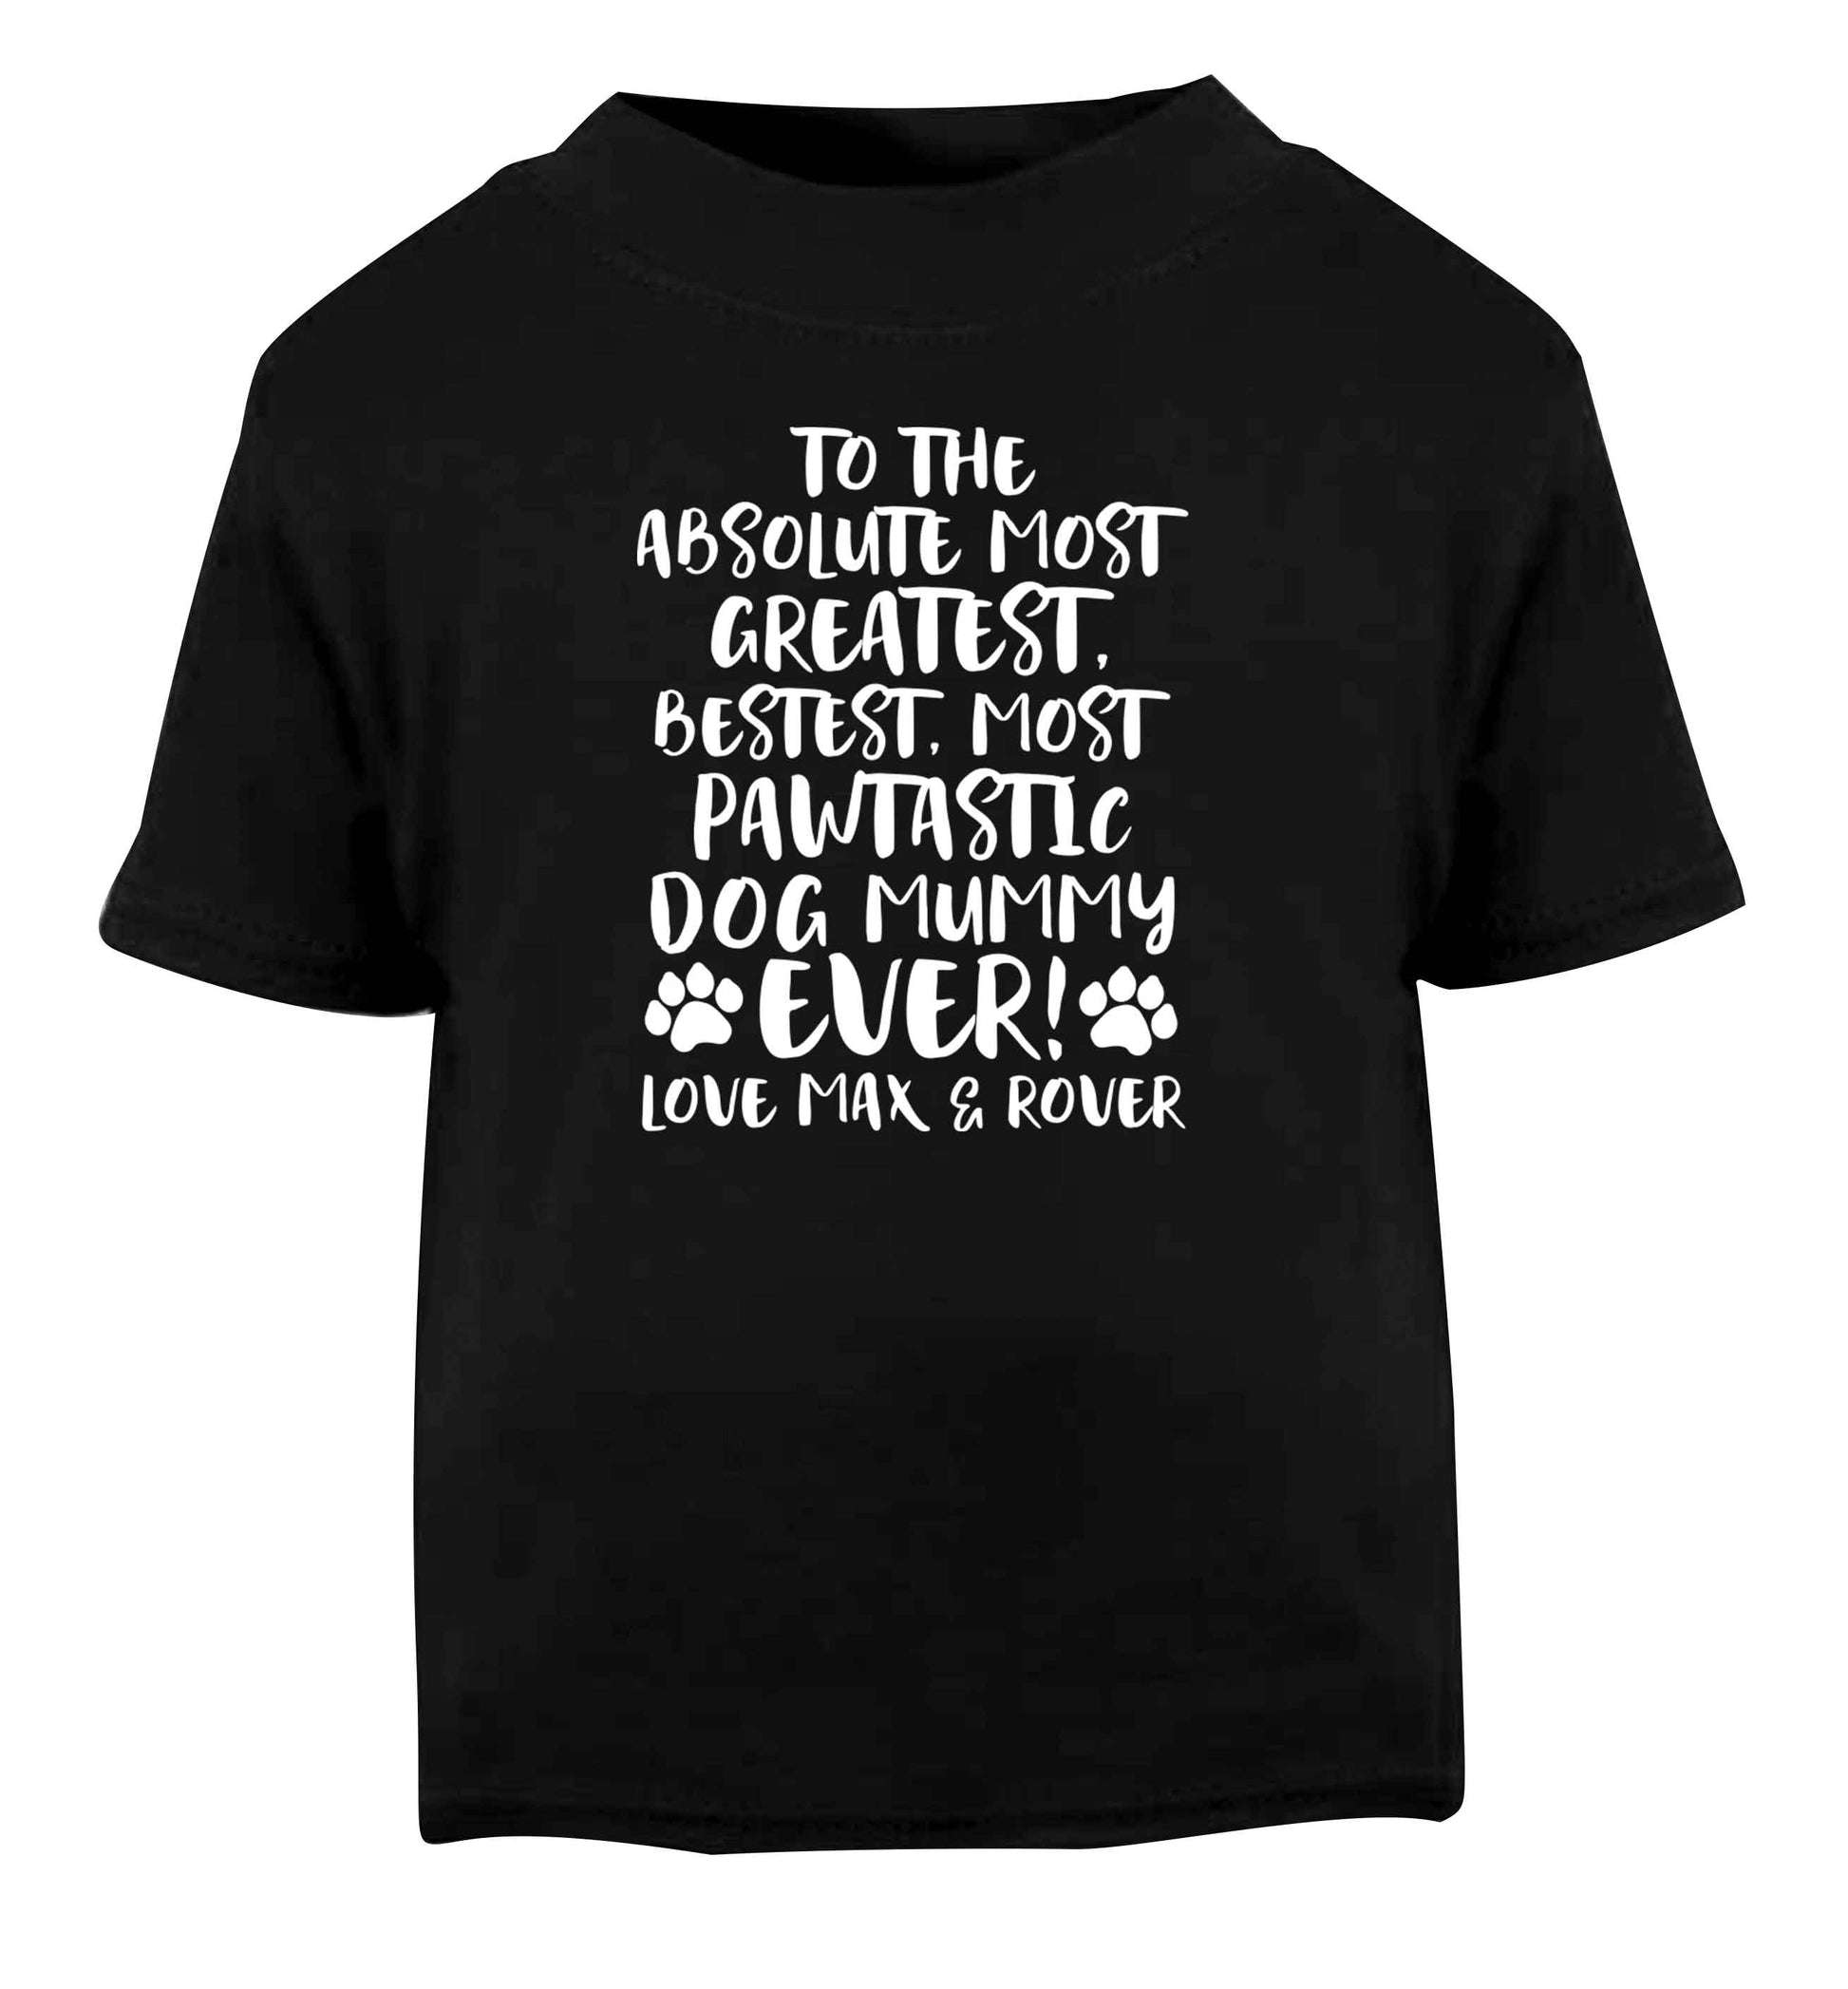 Personalsied to the most pawtastic dog mummy ever Black Baby Toddler Tshirt 2 years